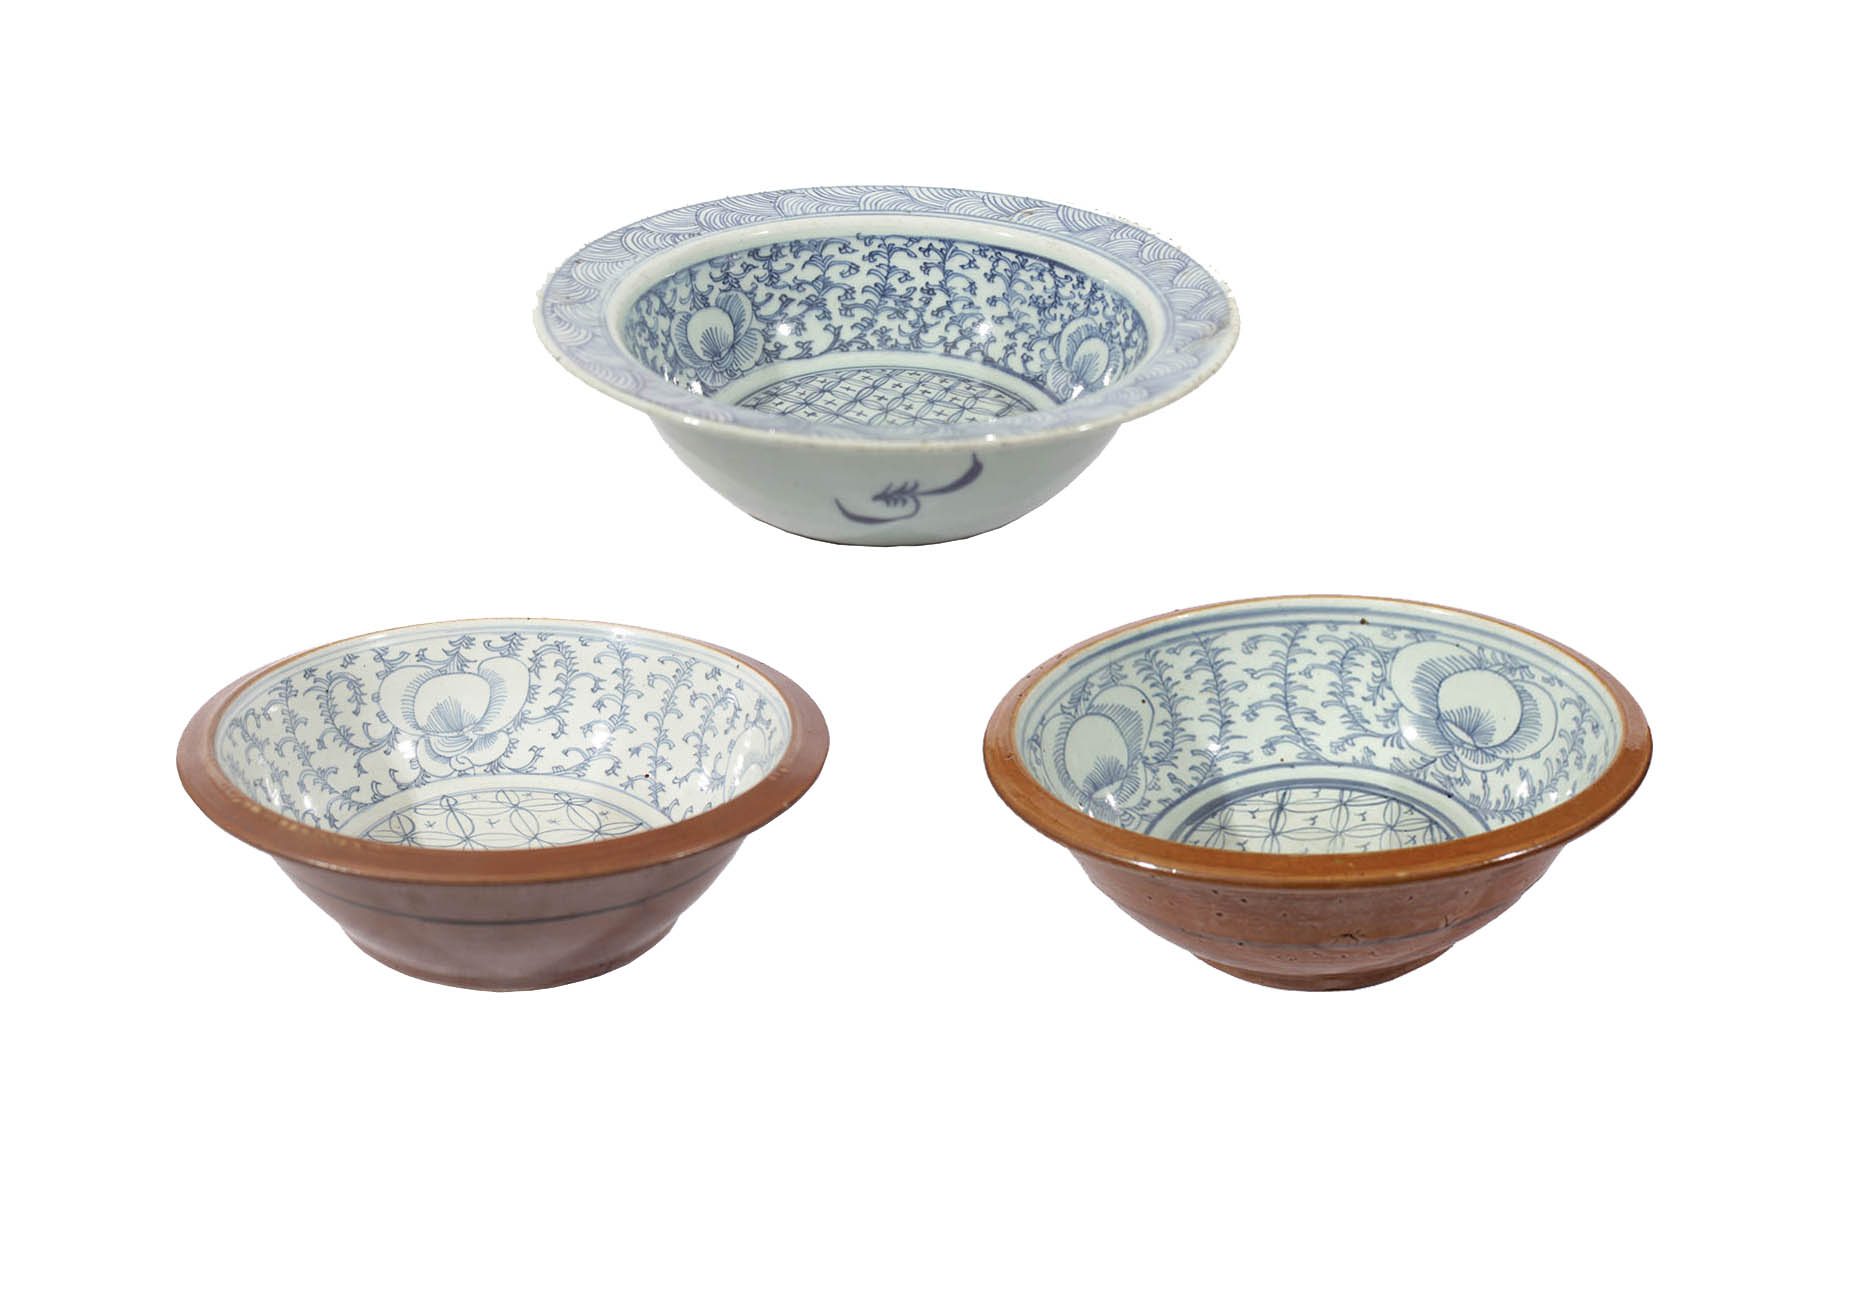 Three 19th century Late Qing blue and white basin